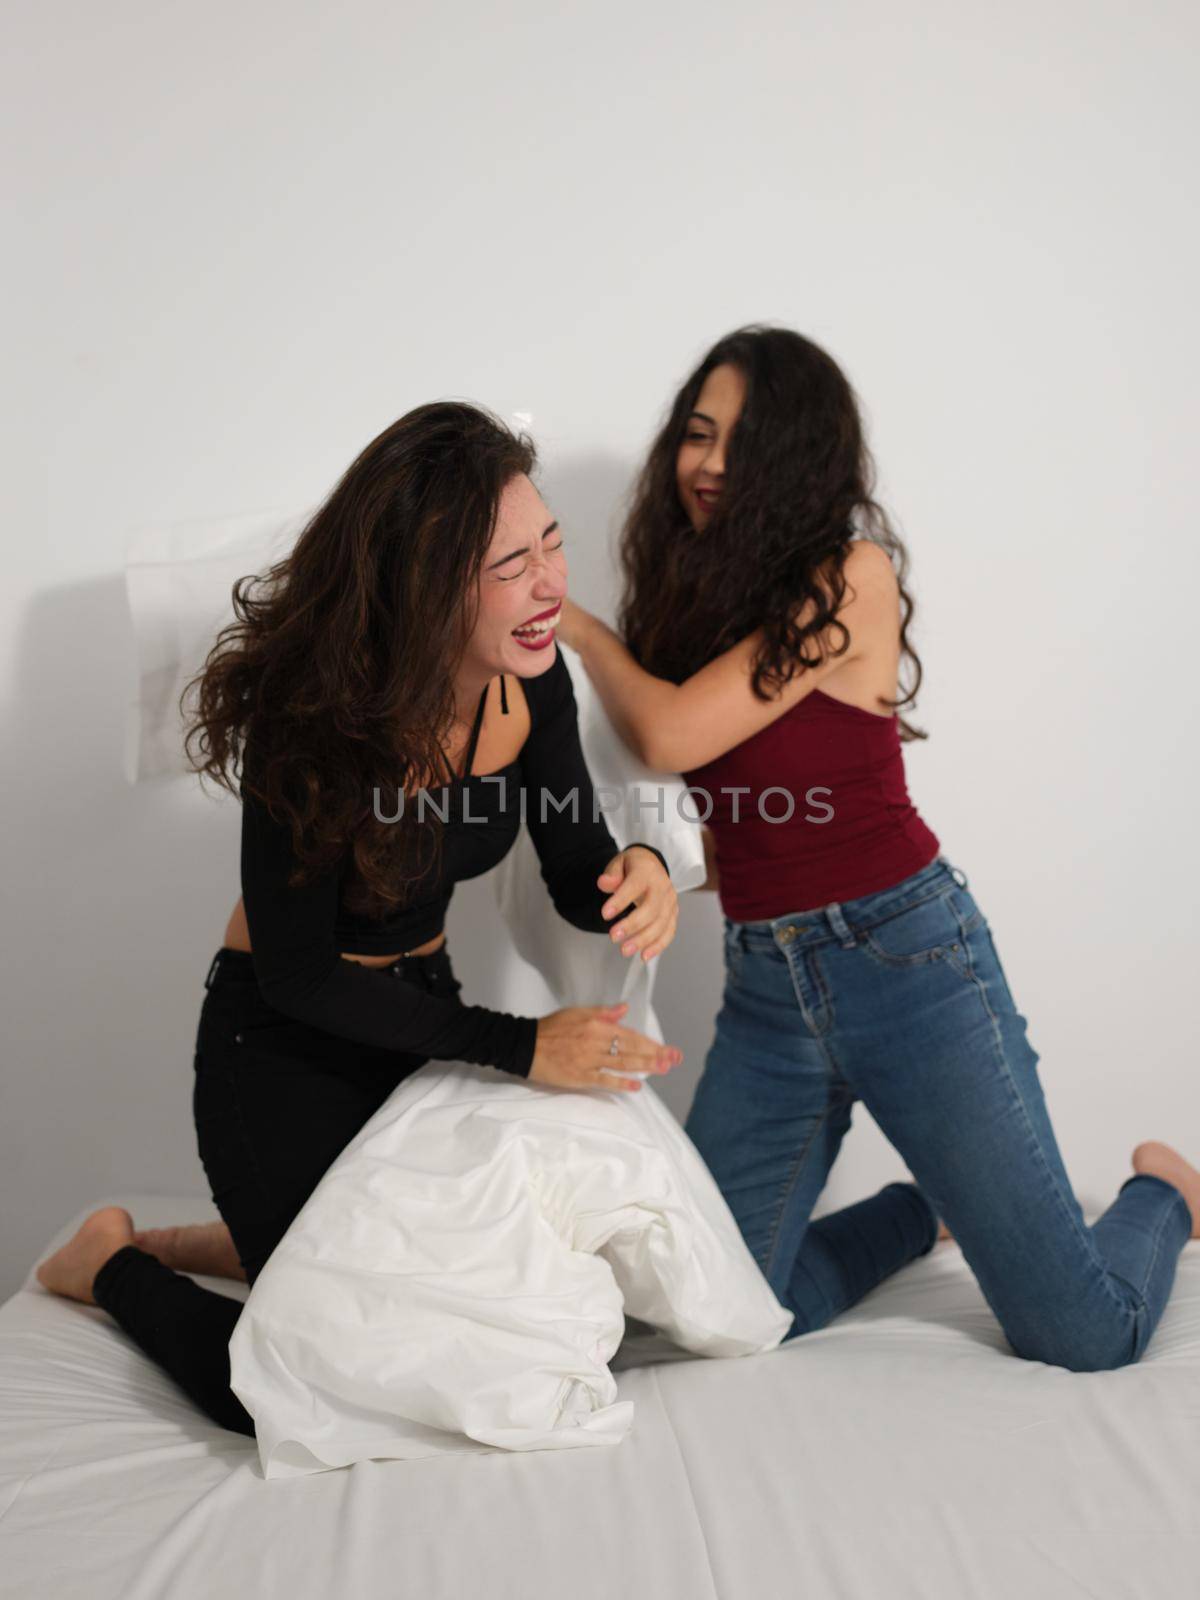 Vertical image of two friends kneeling on bed having fun and laughing playing pillow fight